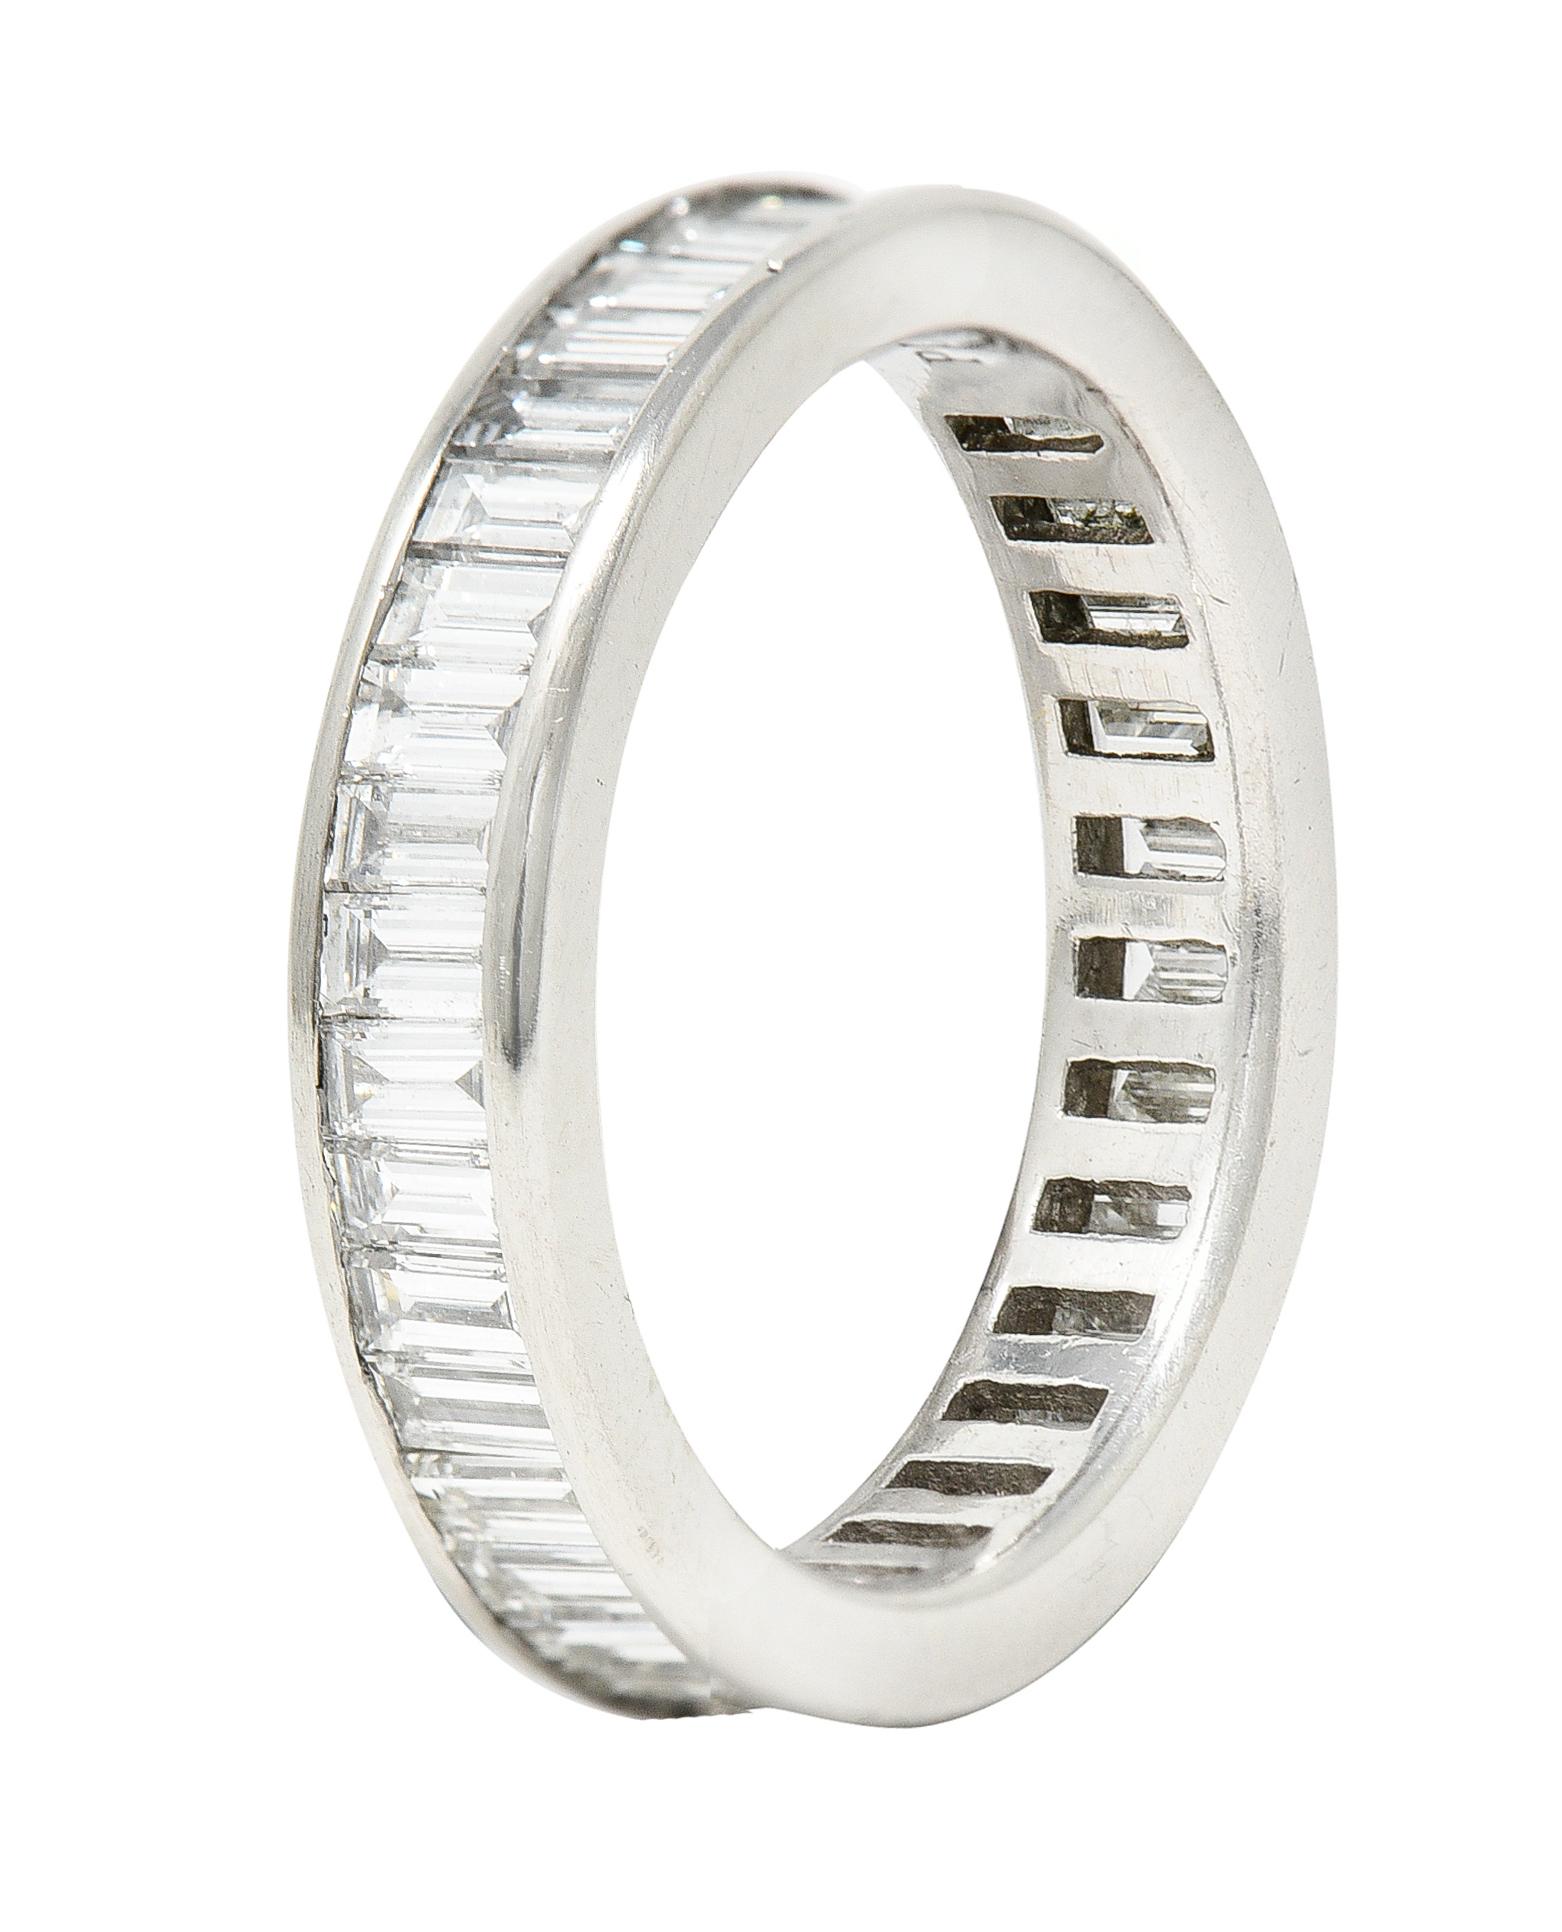 Band ring features baguette cut diamonds channel set fully around. Weighing approximately 2.00 carat total - H color with VS2 clarity. With high polished platinum surround. Stamped for platinum. Circa: Late 20th century. Ring size: 5 and not